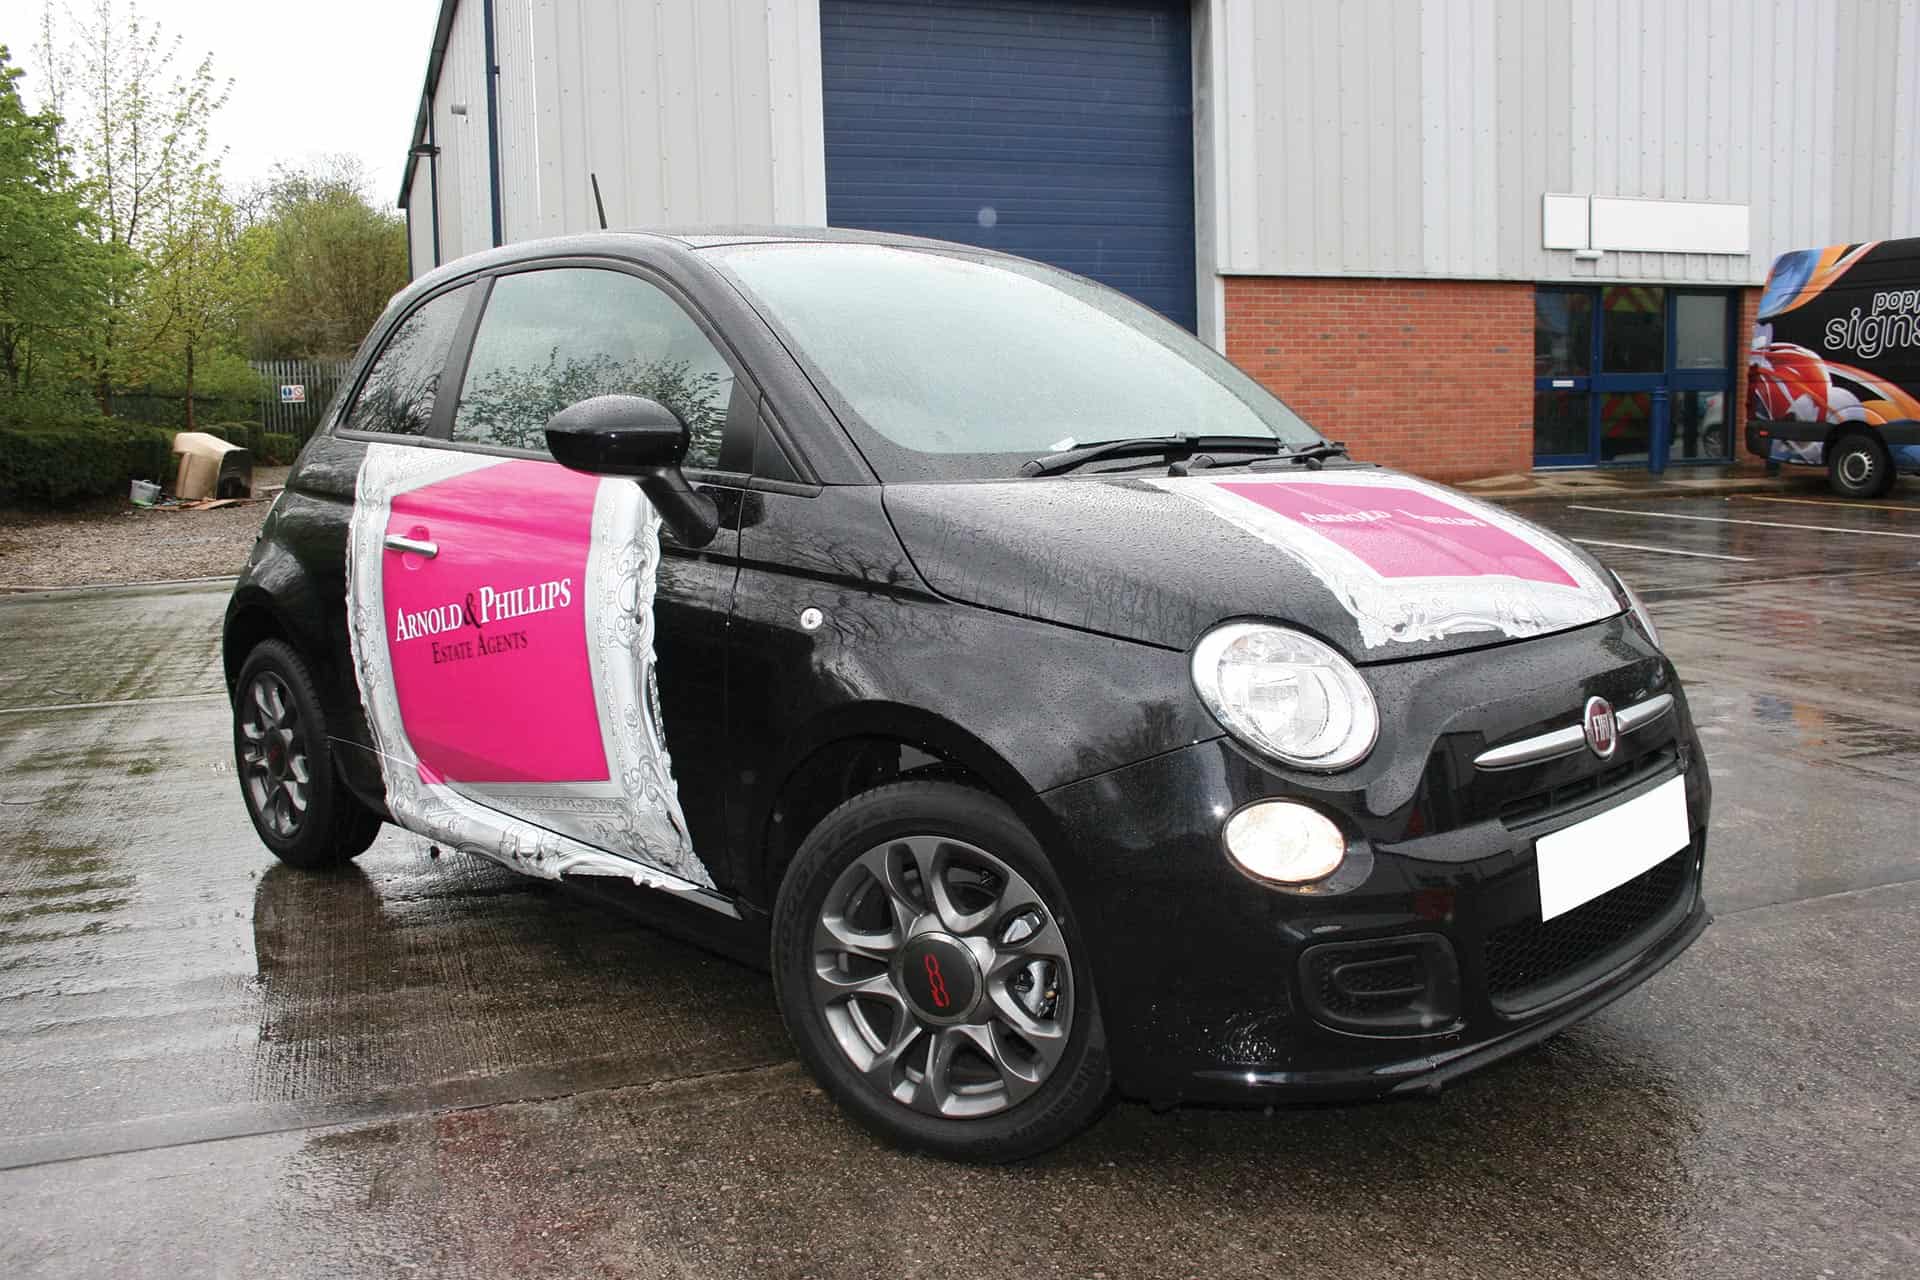 Arnold and Phillips Estate Agent - part vehicle wrap